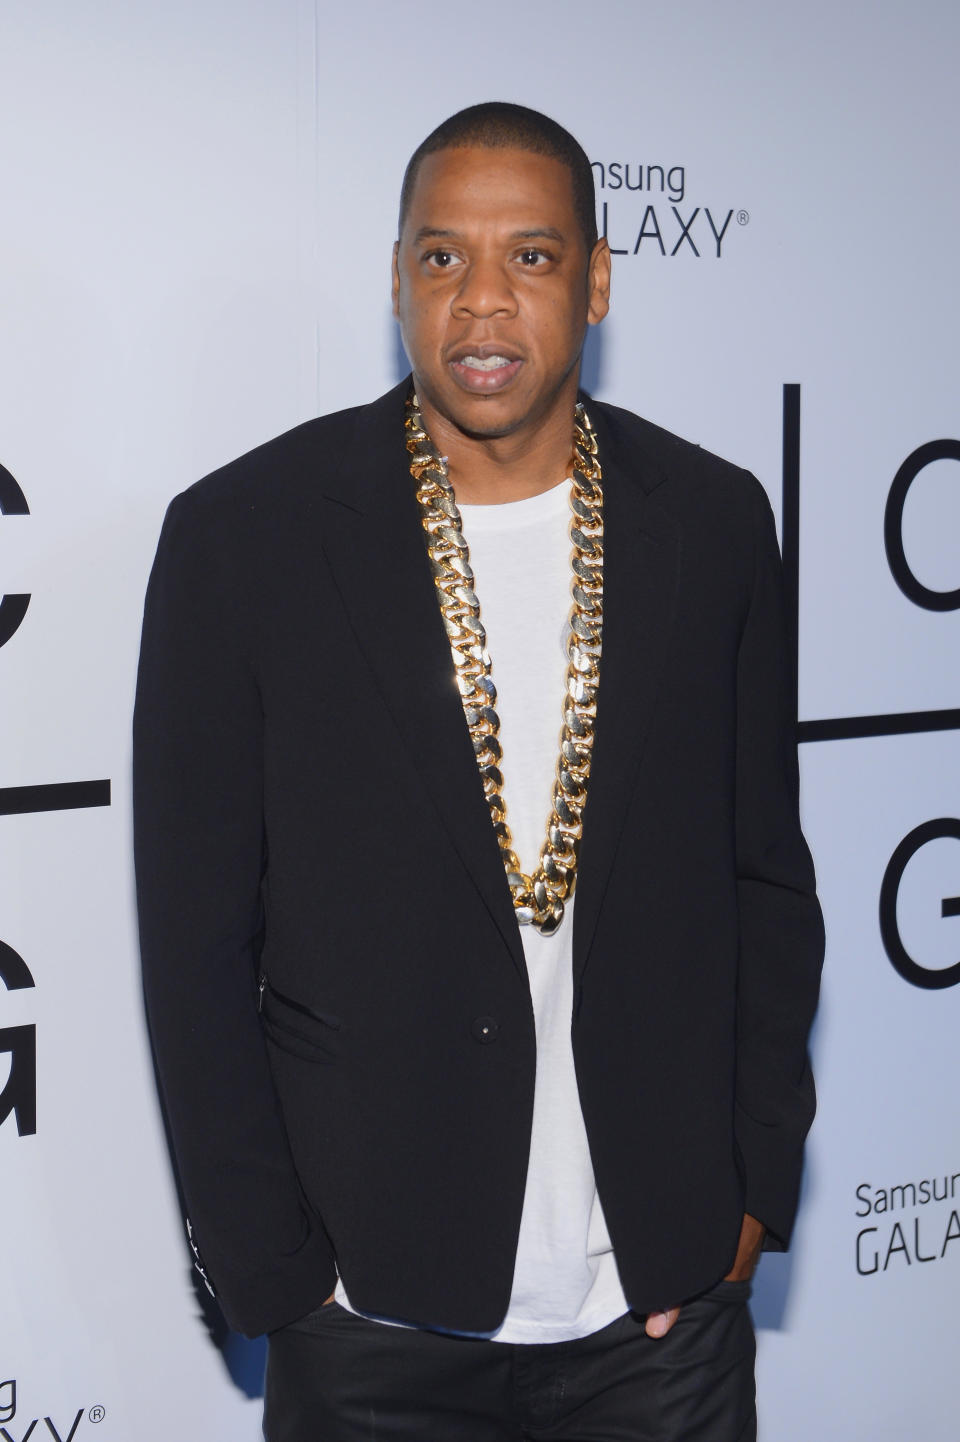 BROOKLYN, NY - JULY 03:  JAY Z attends JAY Z and Samsung Mobile's celebration of the Magna Carta Holy Grail album, available now through a customized app in Google Play and Samsung Apps exclusively for Samsung Galaxy S 4, Galaxy S III and Note II users on July 3, 2013 in Brooklyn City.  (Photo by Larry Busacca/Getty Images for Samsung)